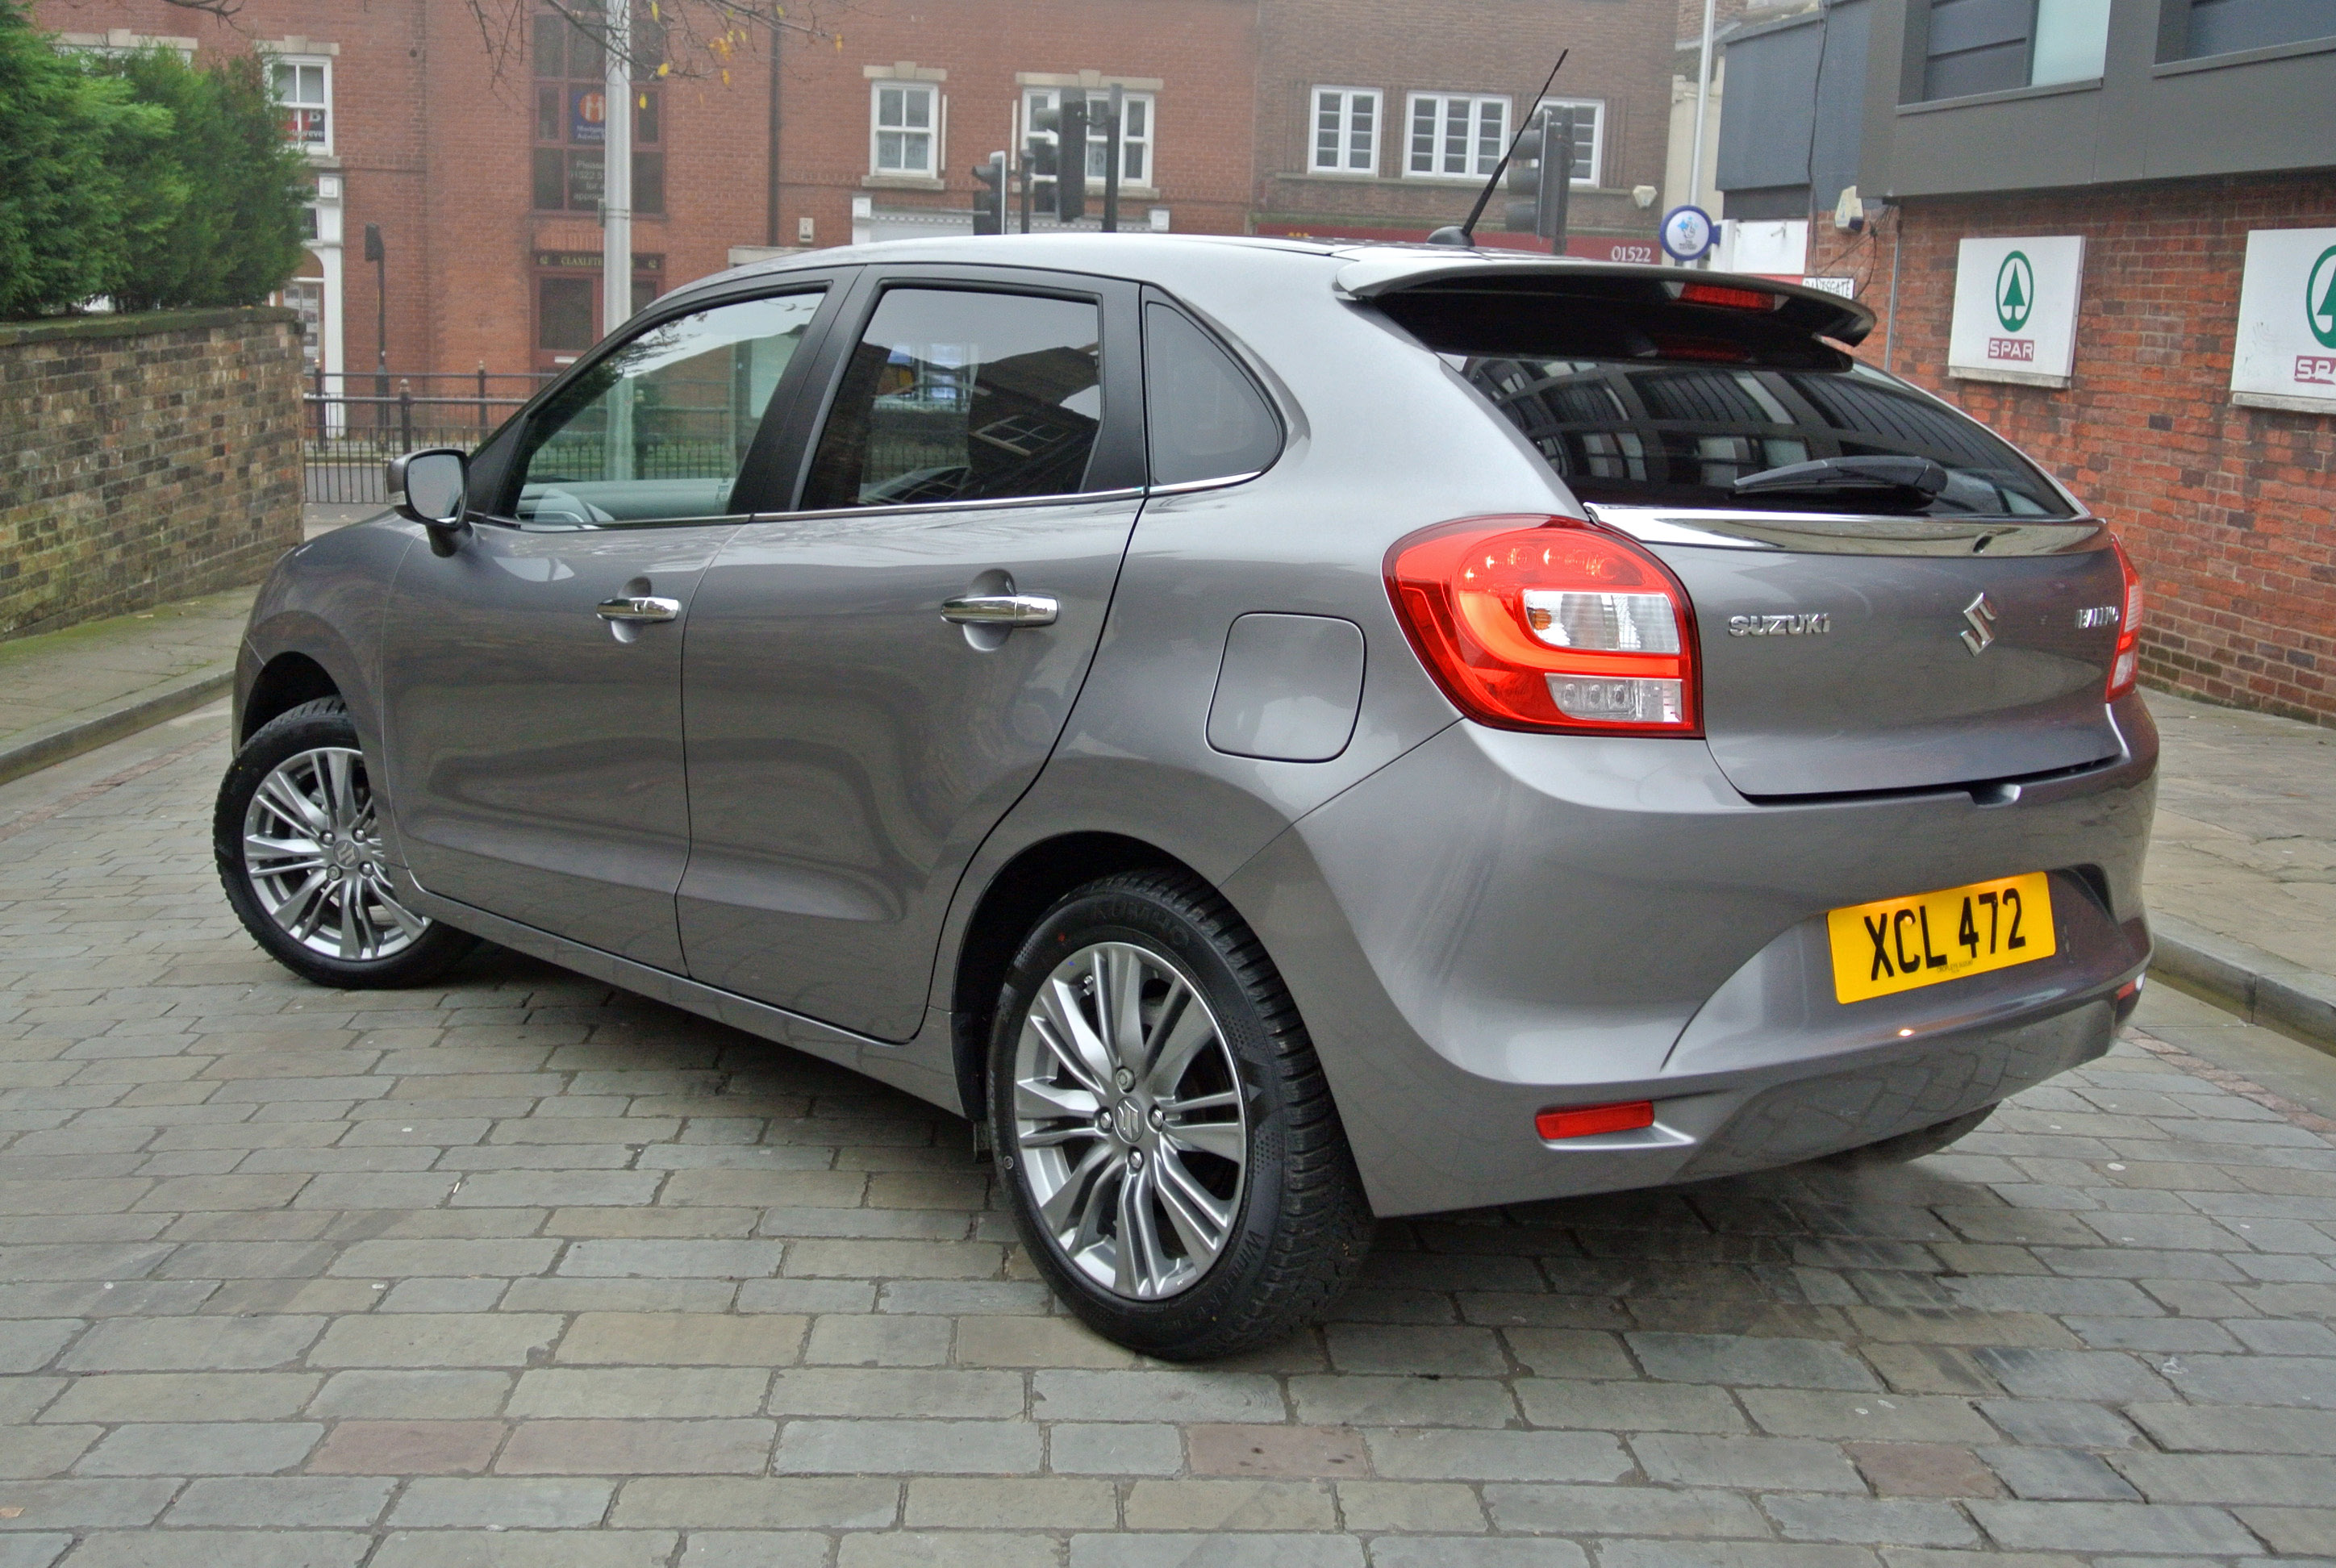 Motoring life with a Suzuki Baleno – Month 4 of 42